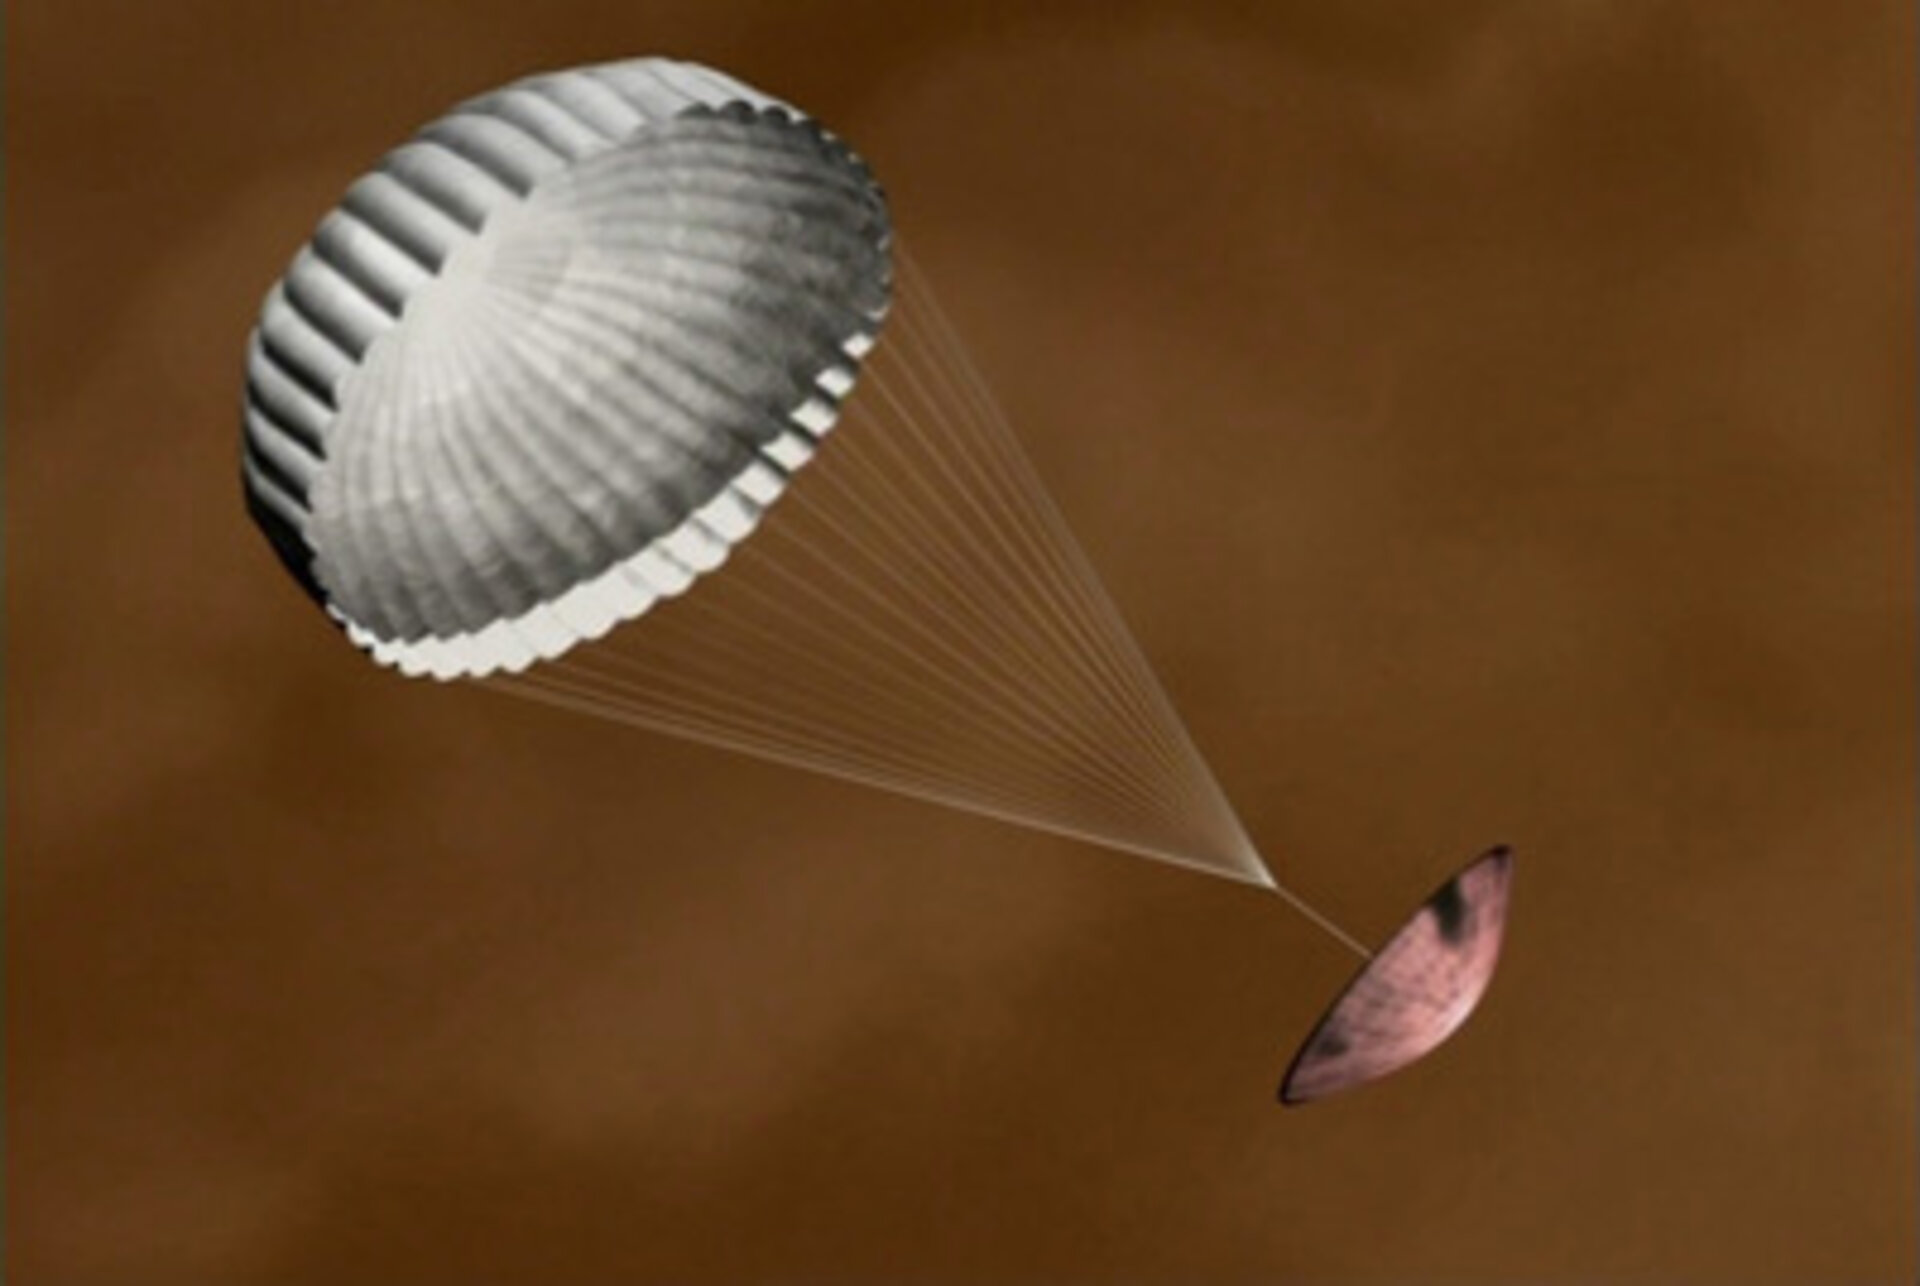 Huygens descending with parachute